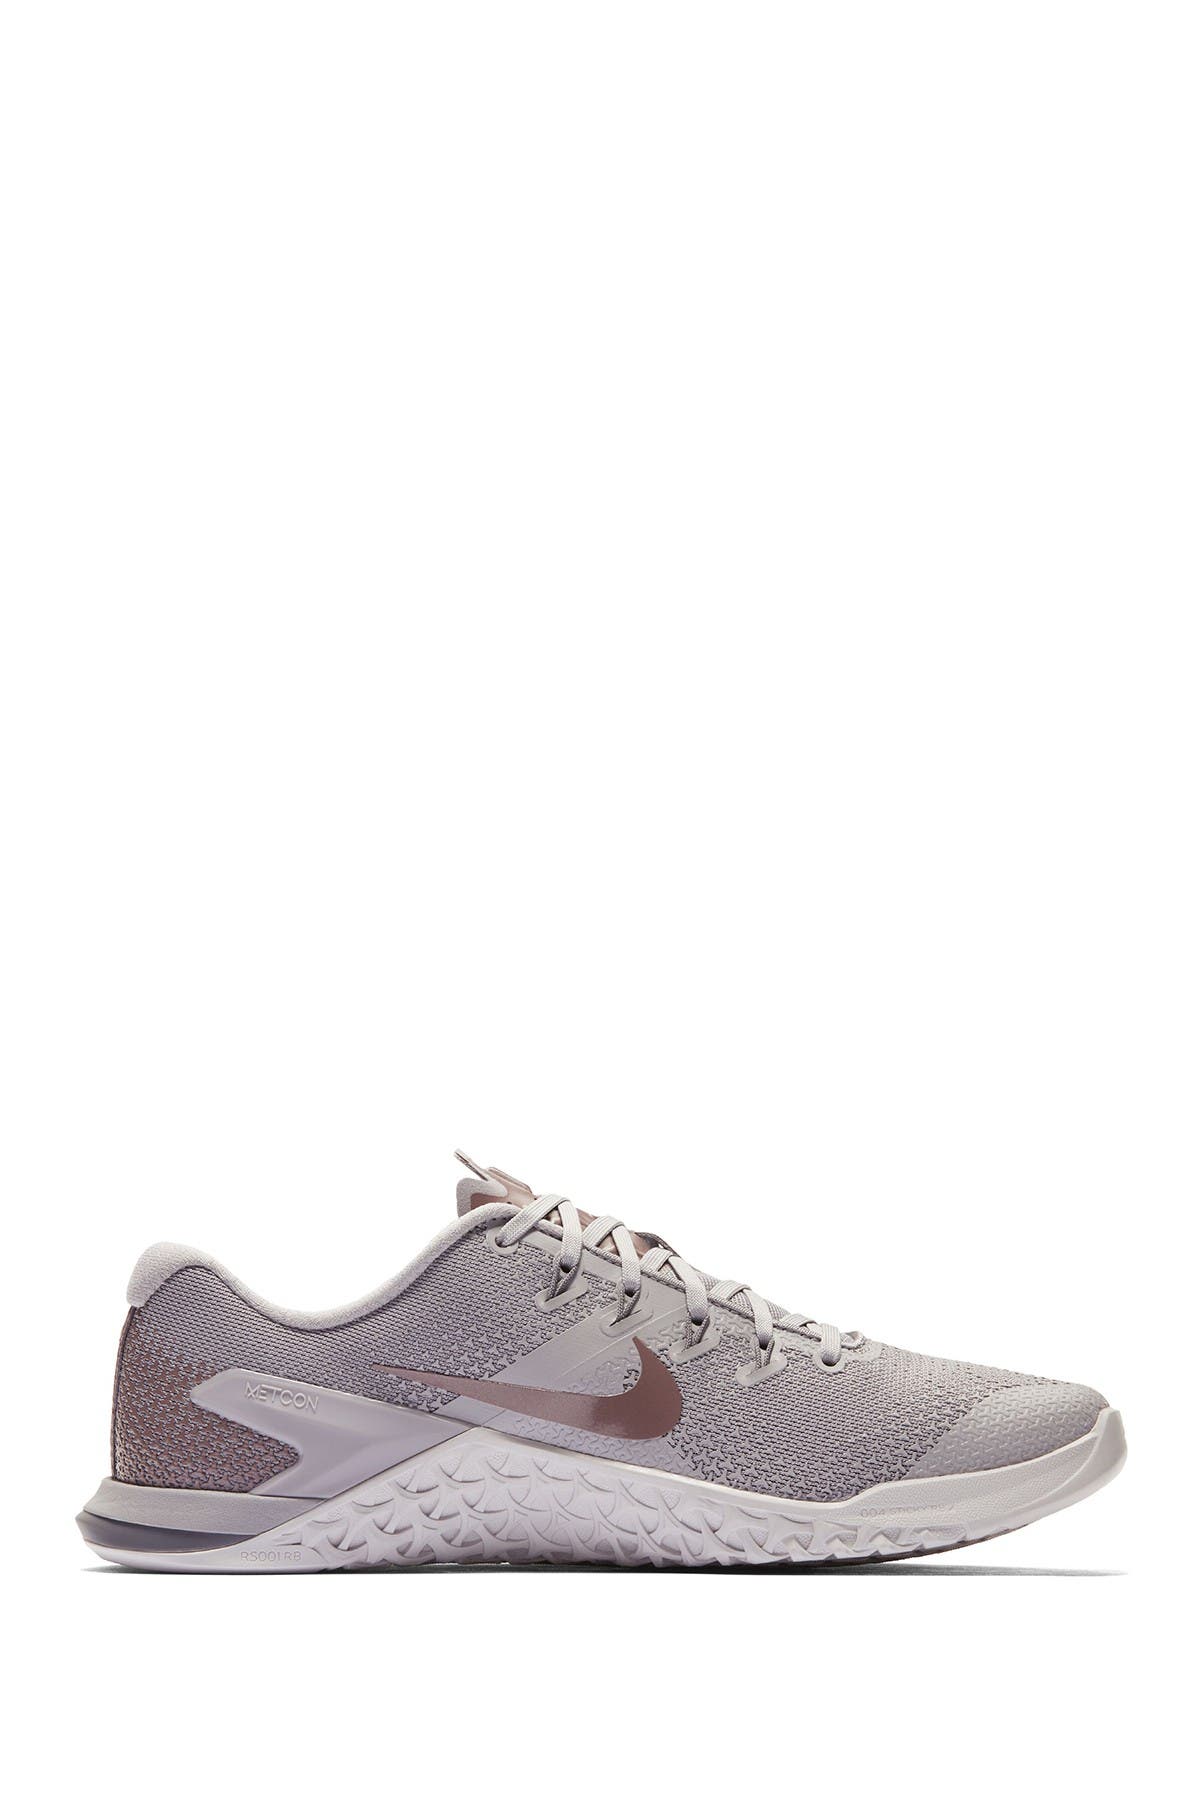 nike metcon 4 lm